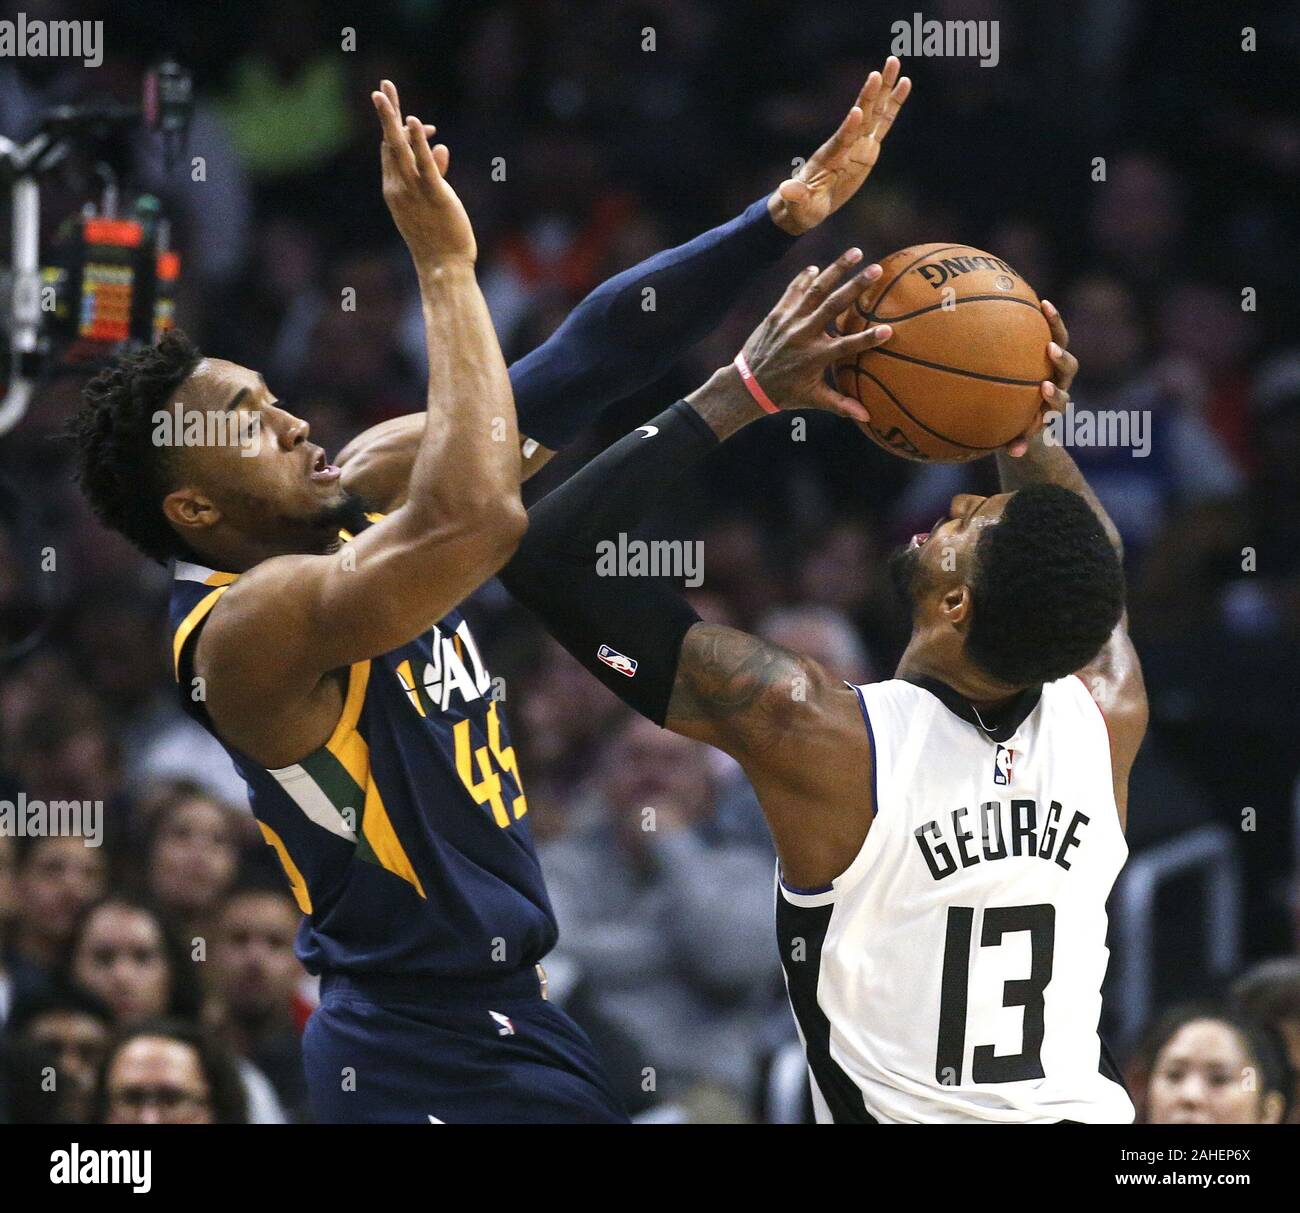 Los Angeles, California, USA. 28th Dec, 2019. Los Angeles Clippers' Paul George (13) goes up to basket while defended by Utah Jazz's Donovan Mitchell (45) during an NBA basketball game between Los Angeles Clippers and Utah Jazz, Saturday, December 28, 2019, in Los Angeles. Credit: Ringo Chiu/ZUMA Wire/Alamy Live News Stock Photo